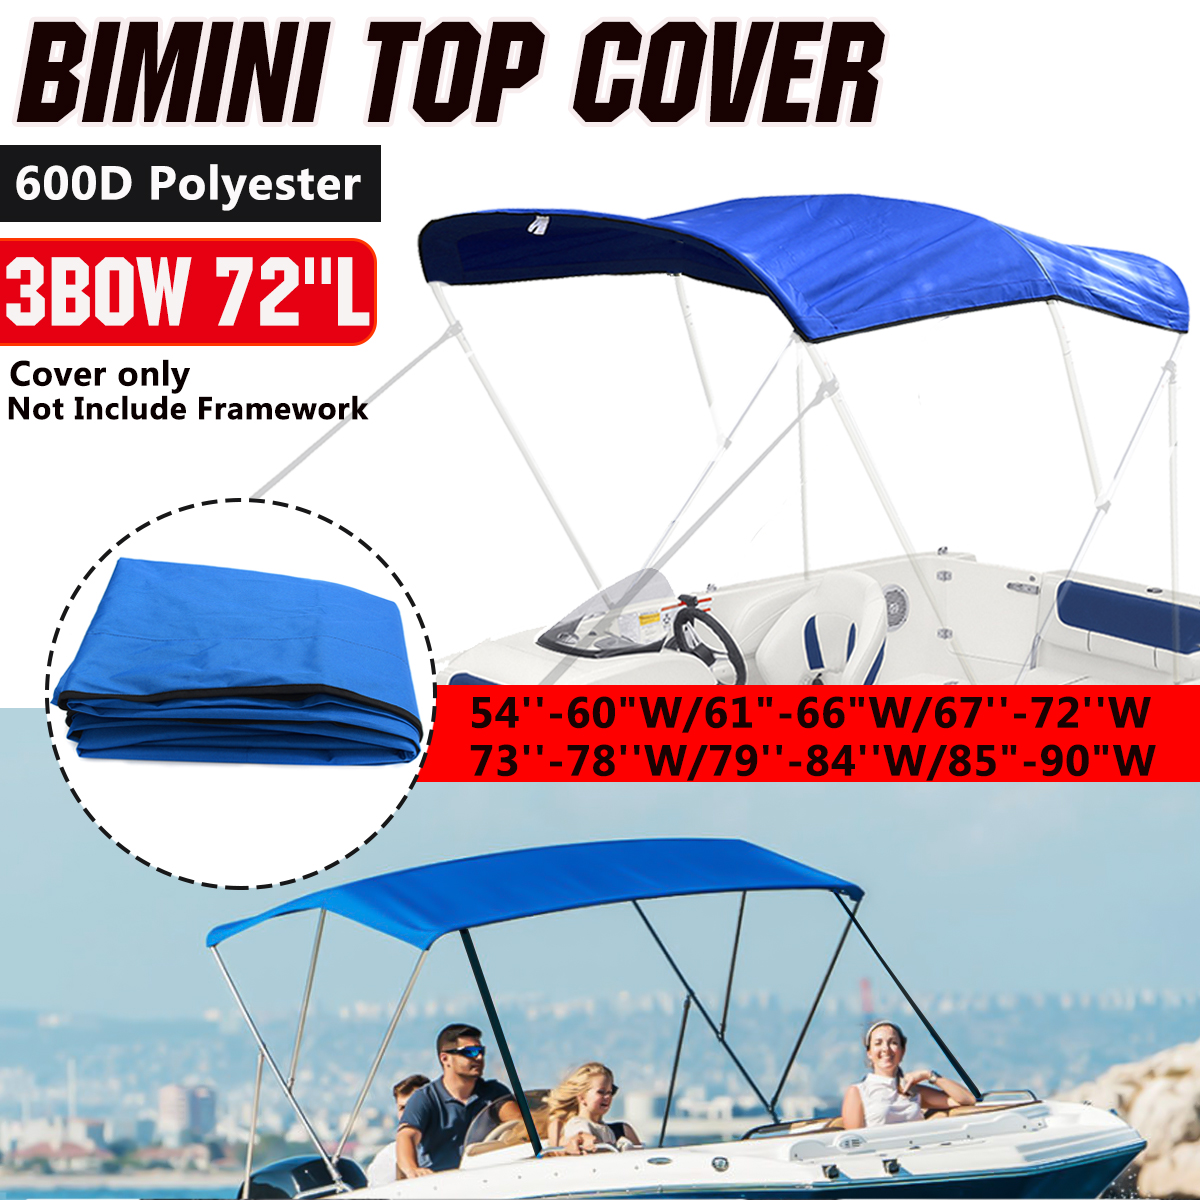 Boat Covers 600D 3 Bow Bimini Top Replacement Canvas